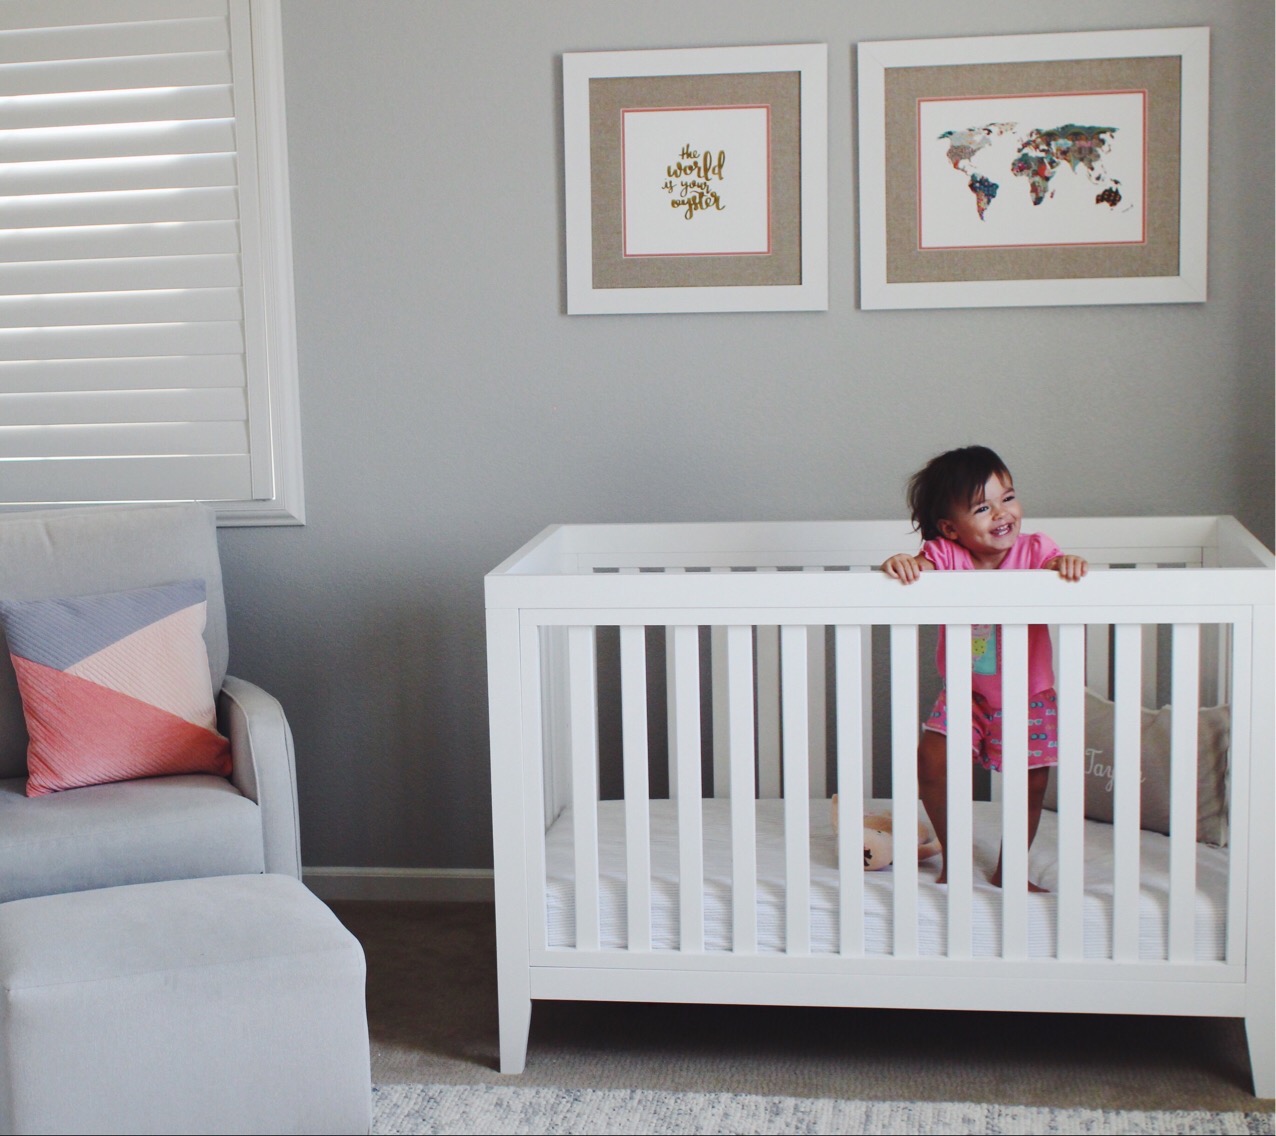 Stay at home mom schedule and routine for a toddler